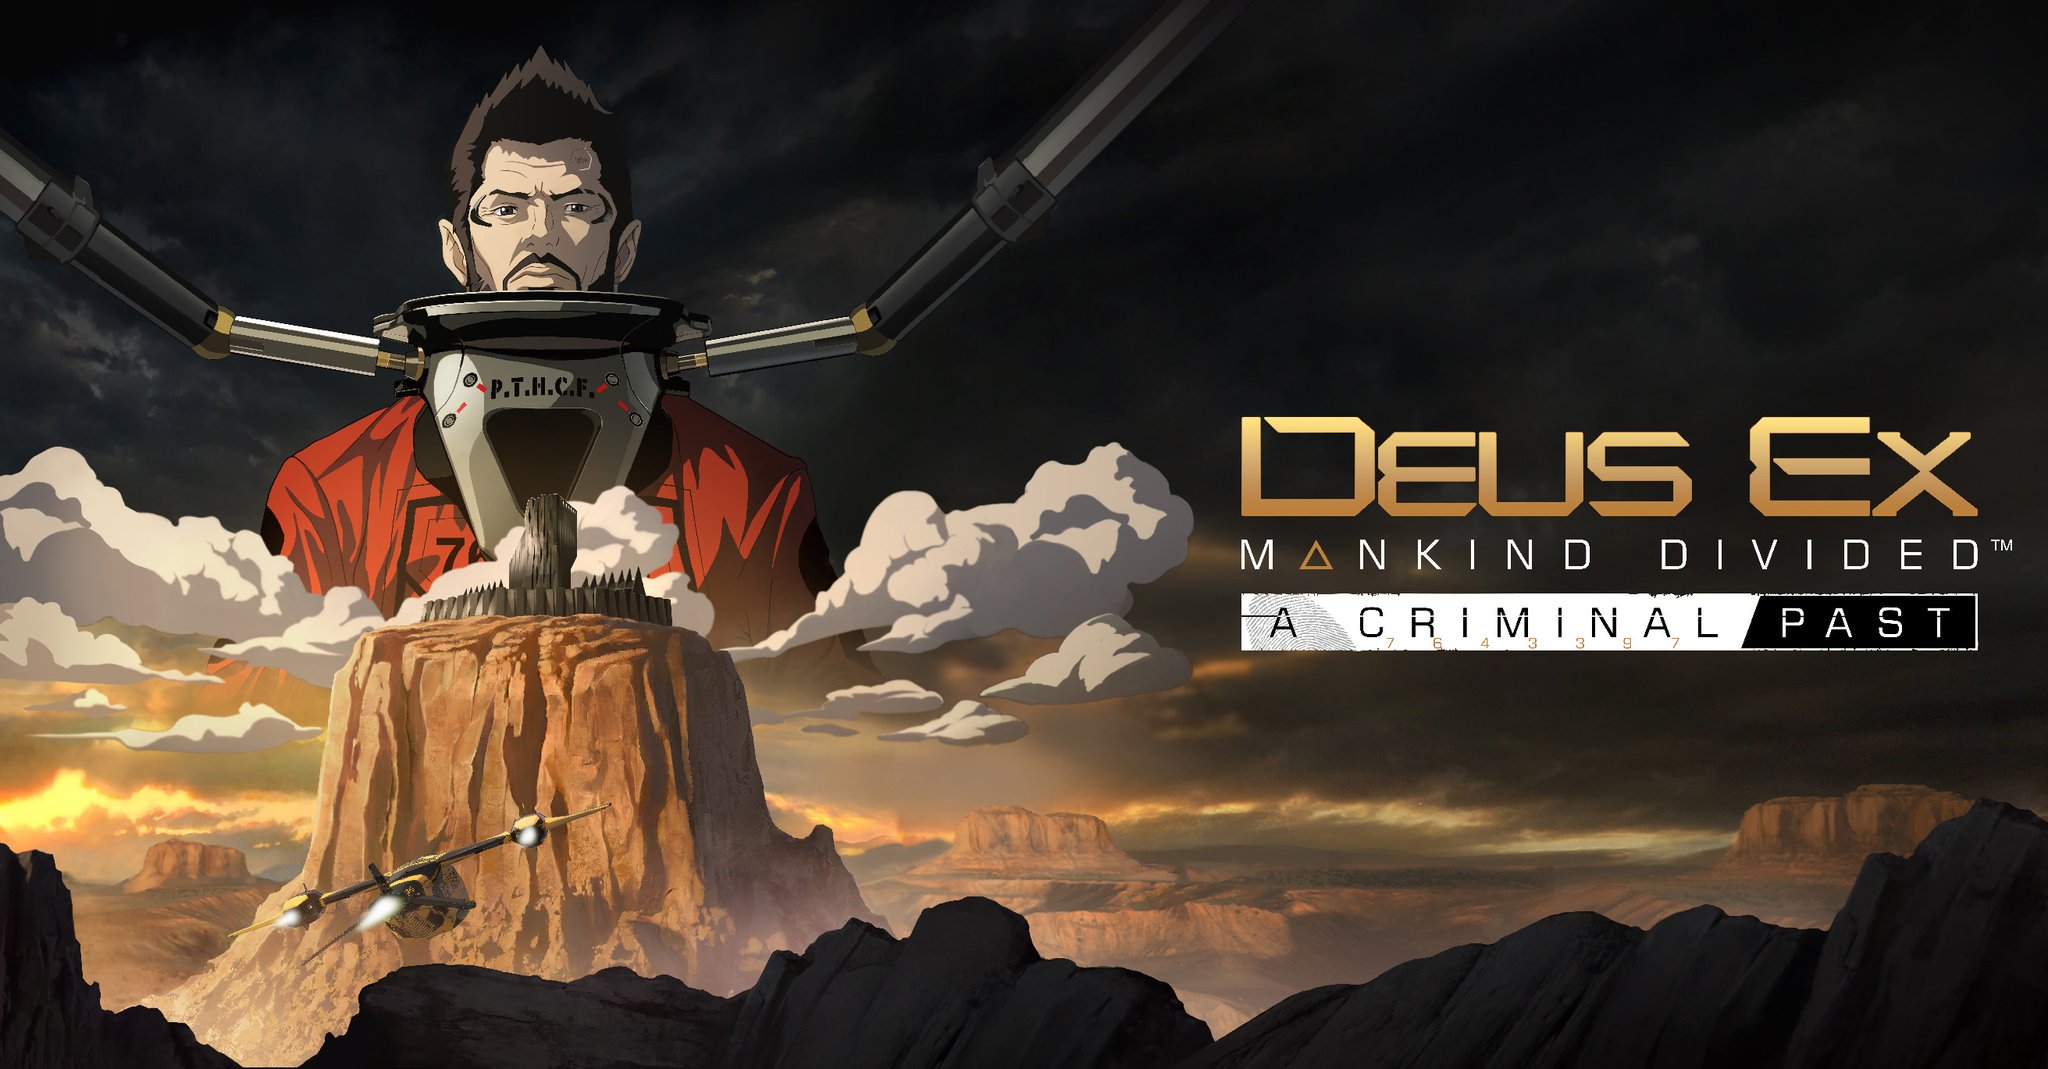 Mankind Divided Last DLC Release